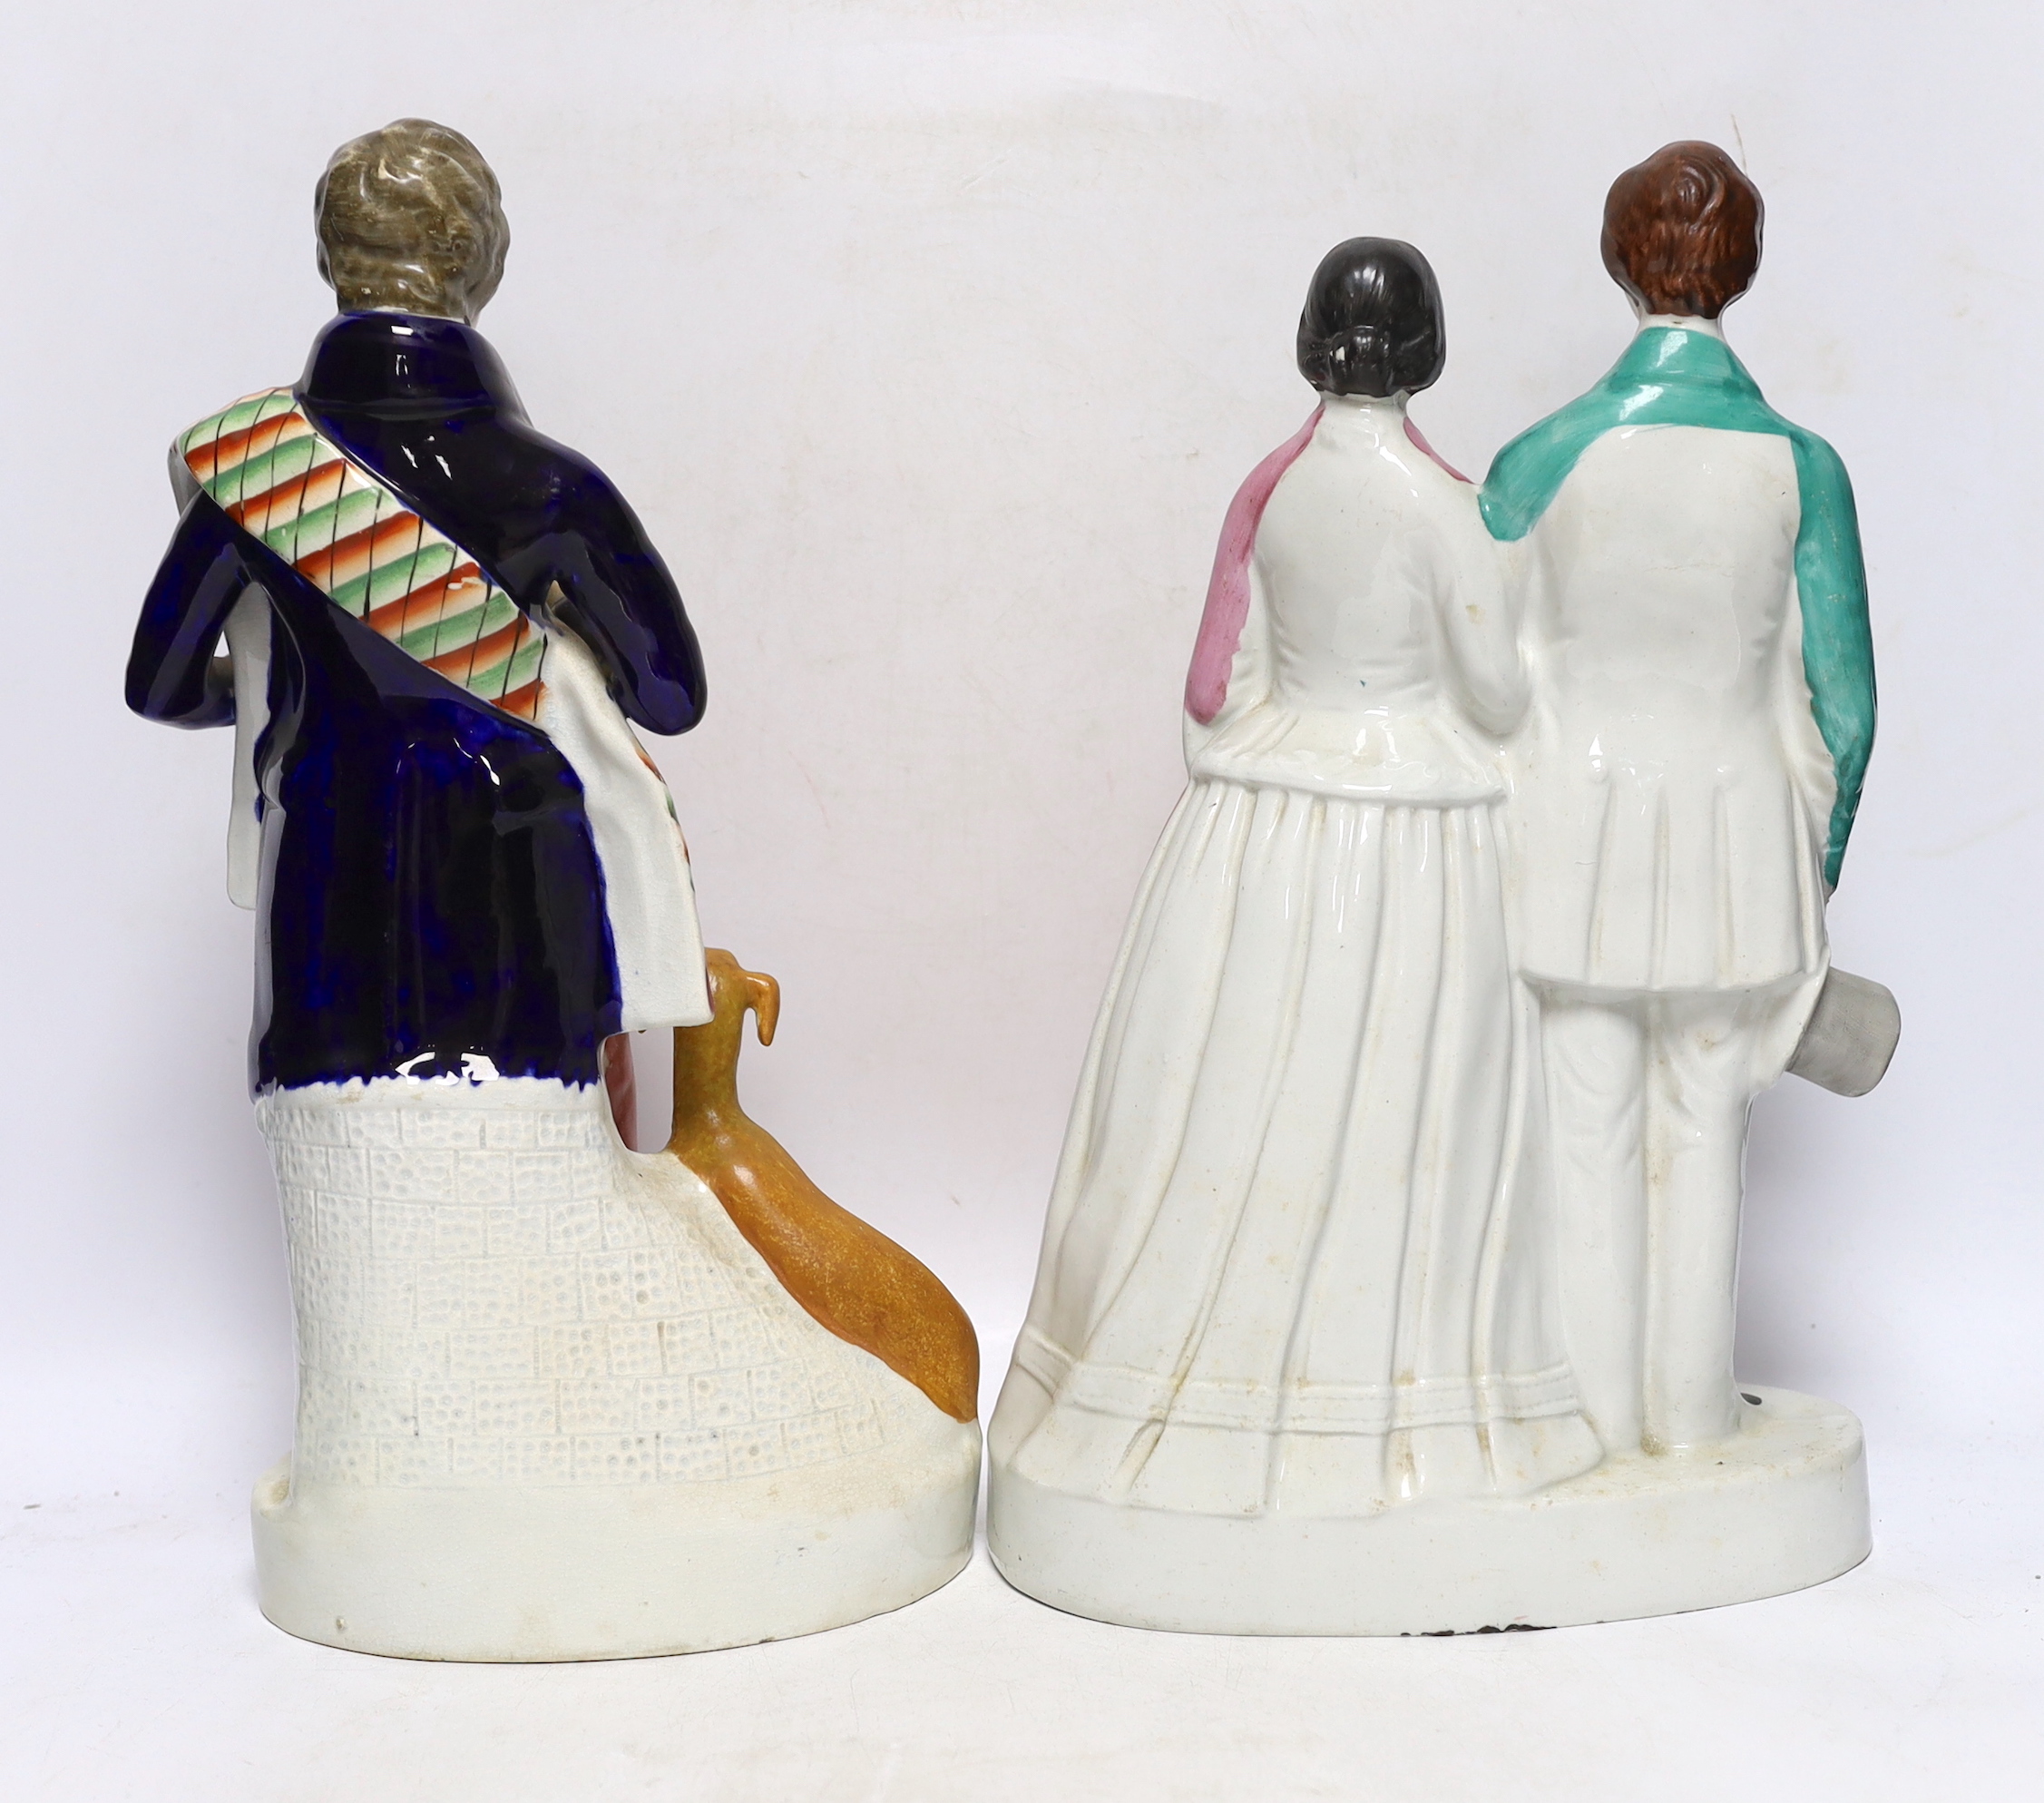 Four mid 19th century Staffordshire figure groups including Queen Victoria and Prince Albert, two individual figures of the Queen and Prince and Sir Walter Scott, tallest 36cm high